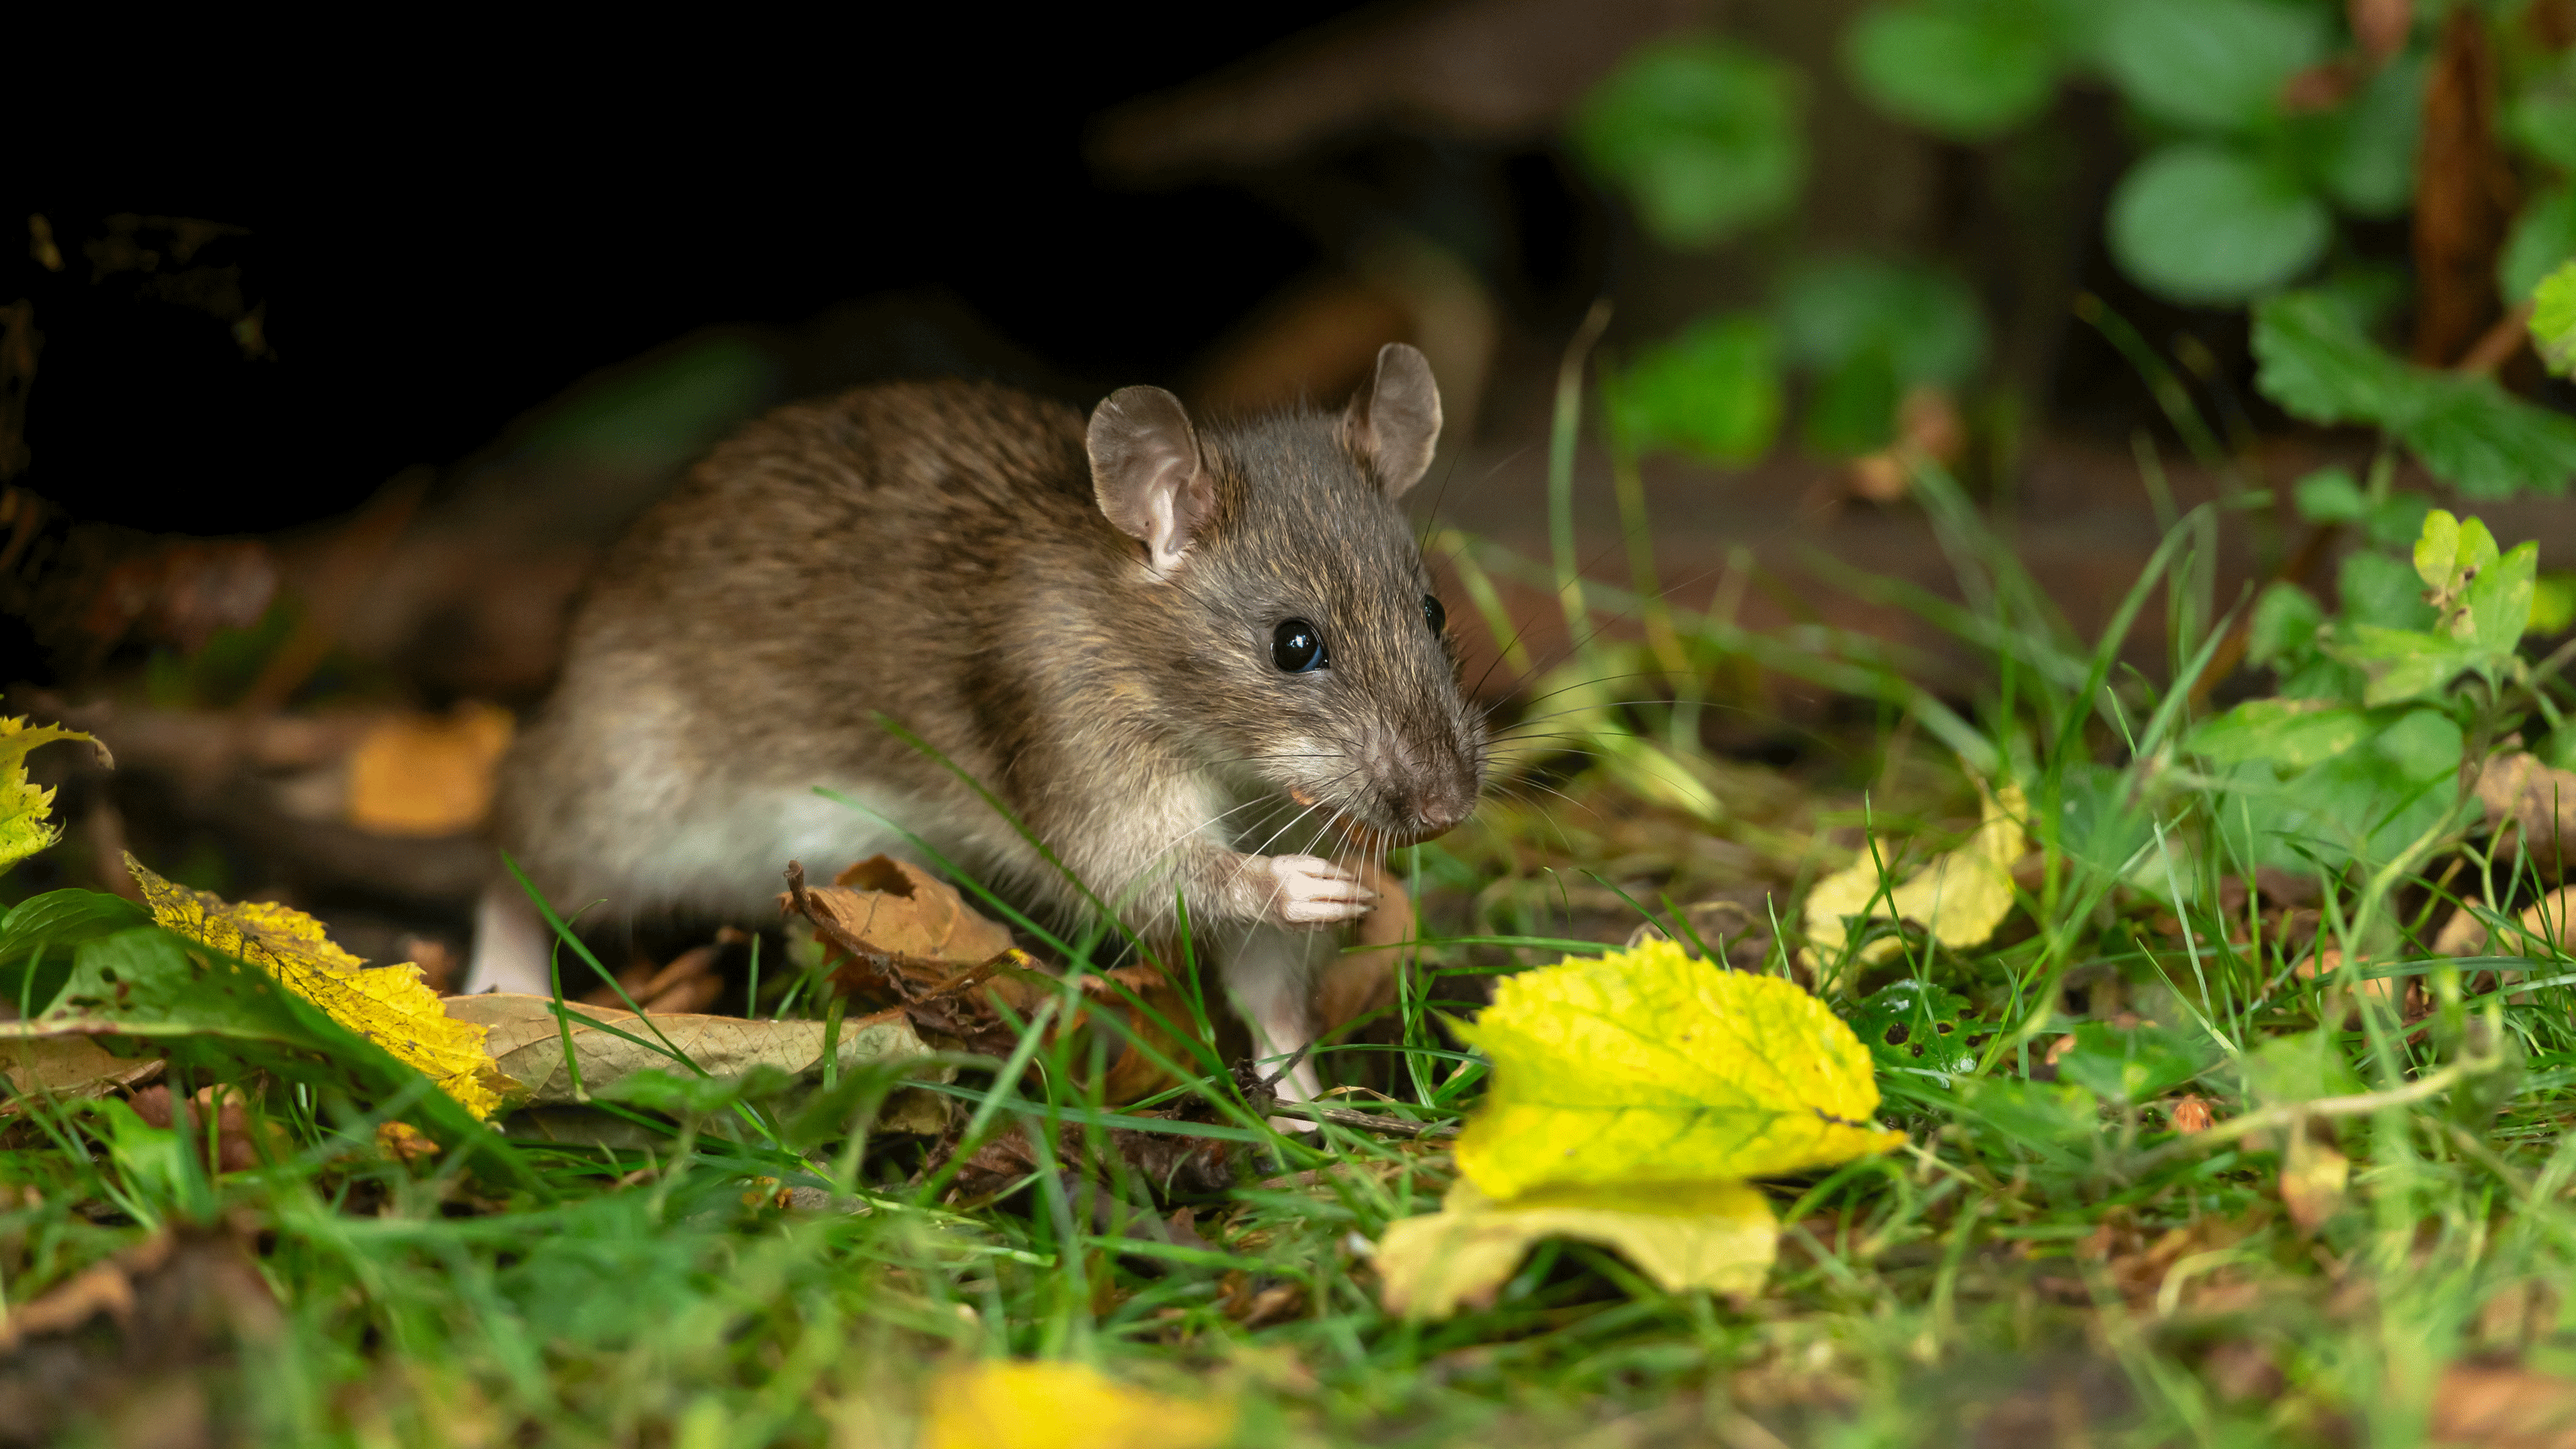 Rodent Proof Storage: 8 Ways to Keep Mice Out Permanently